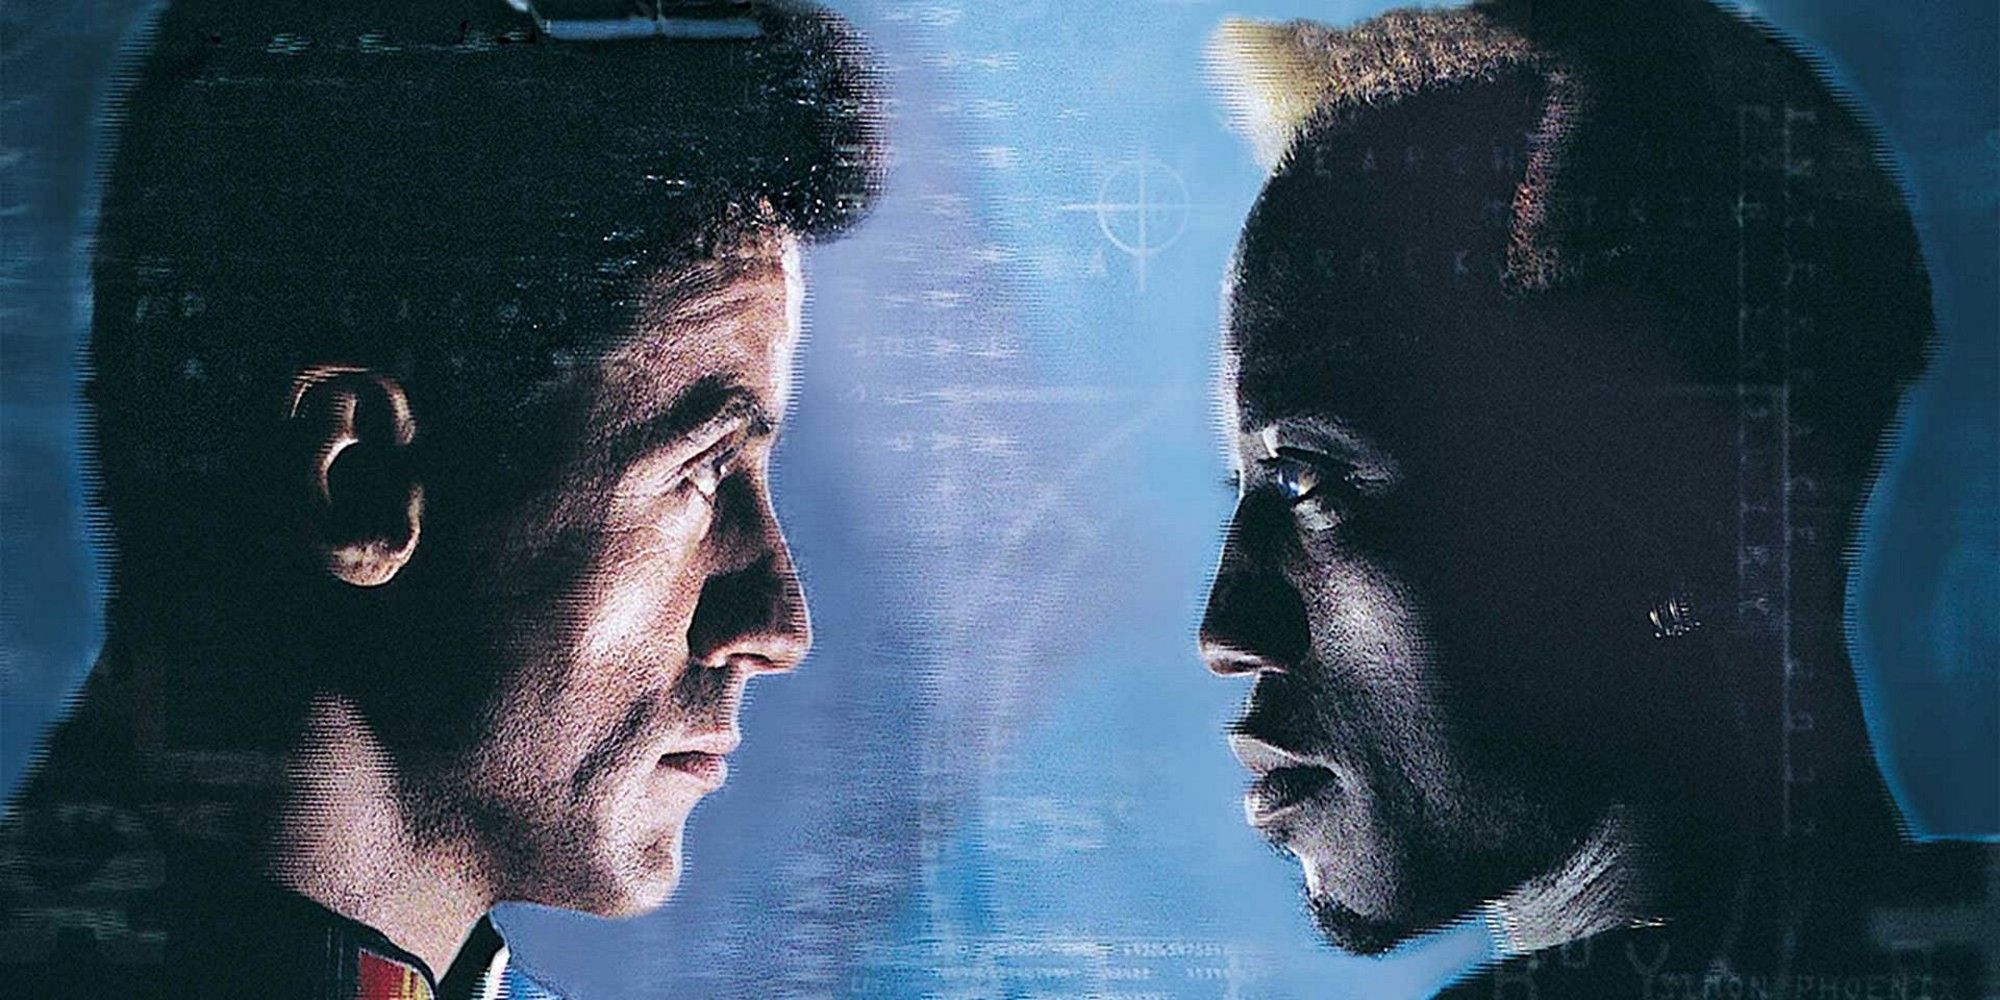 Sylvester Stallone stares down Wesley Snipes in an image from Demolition Man